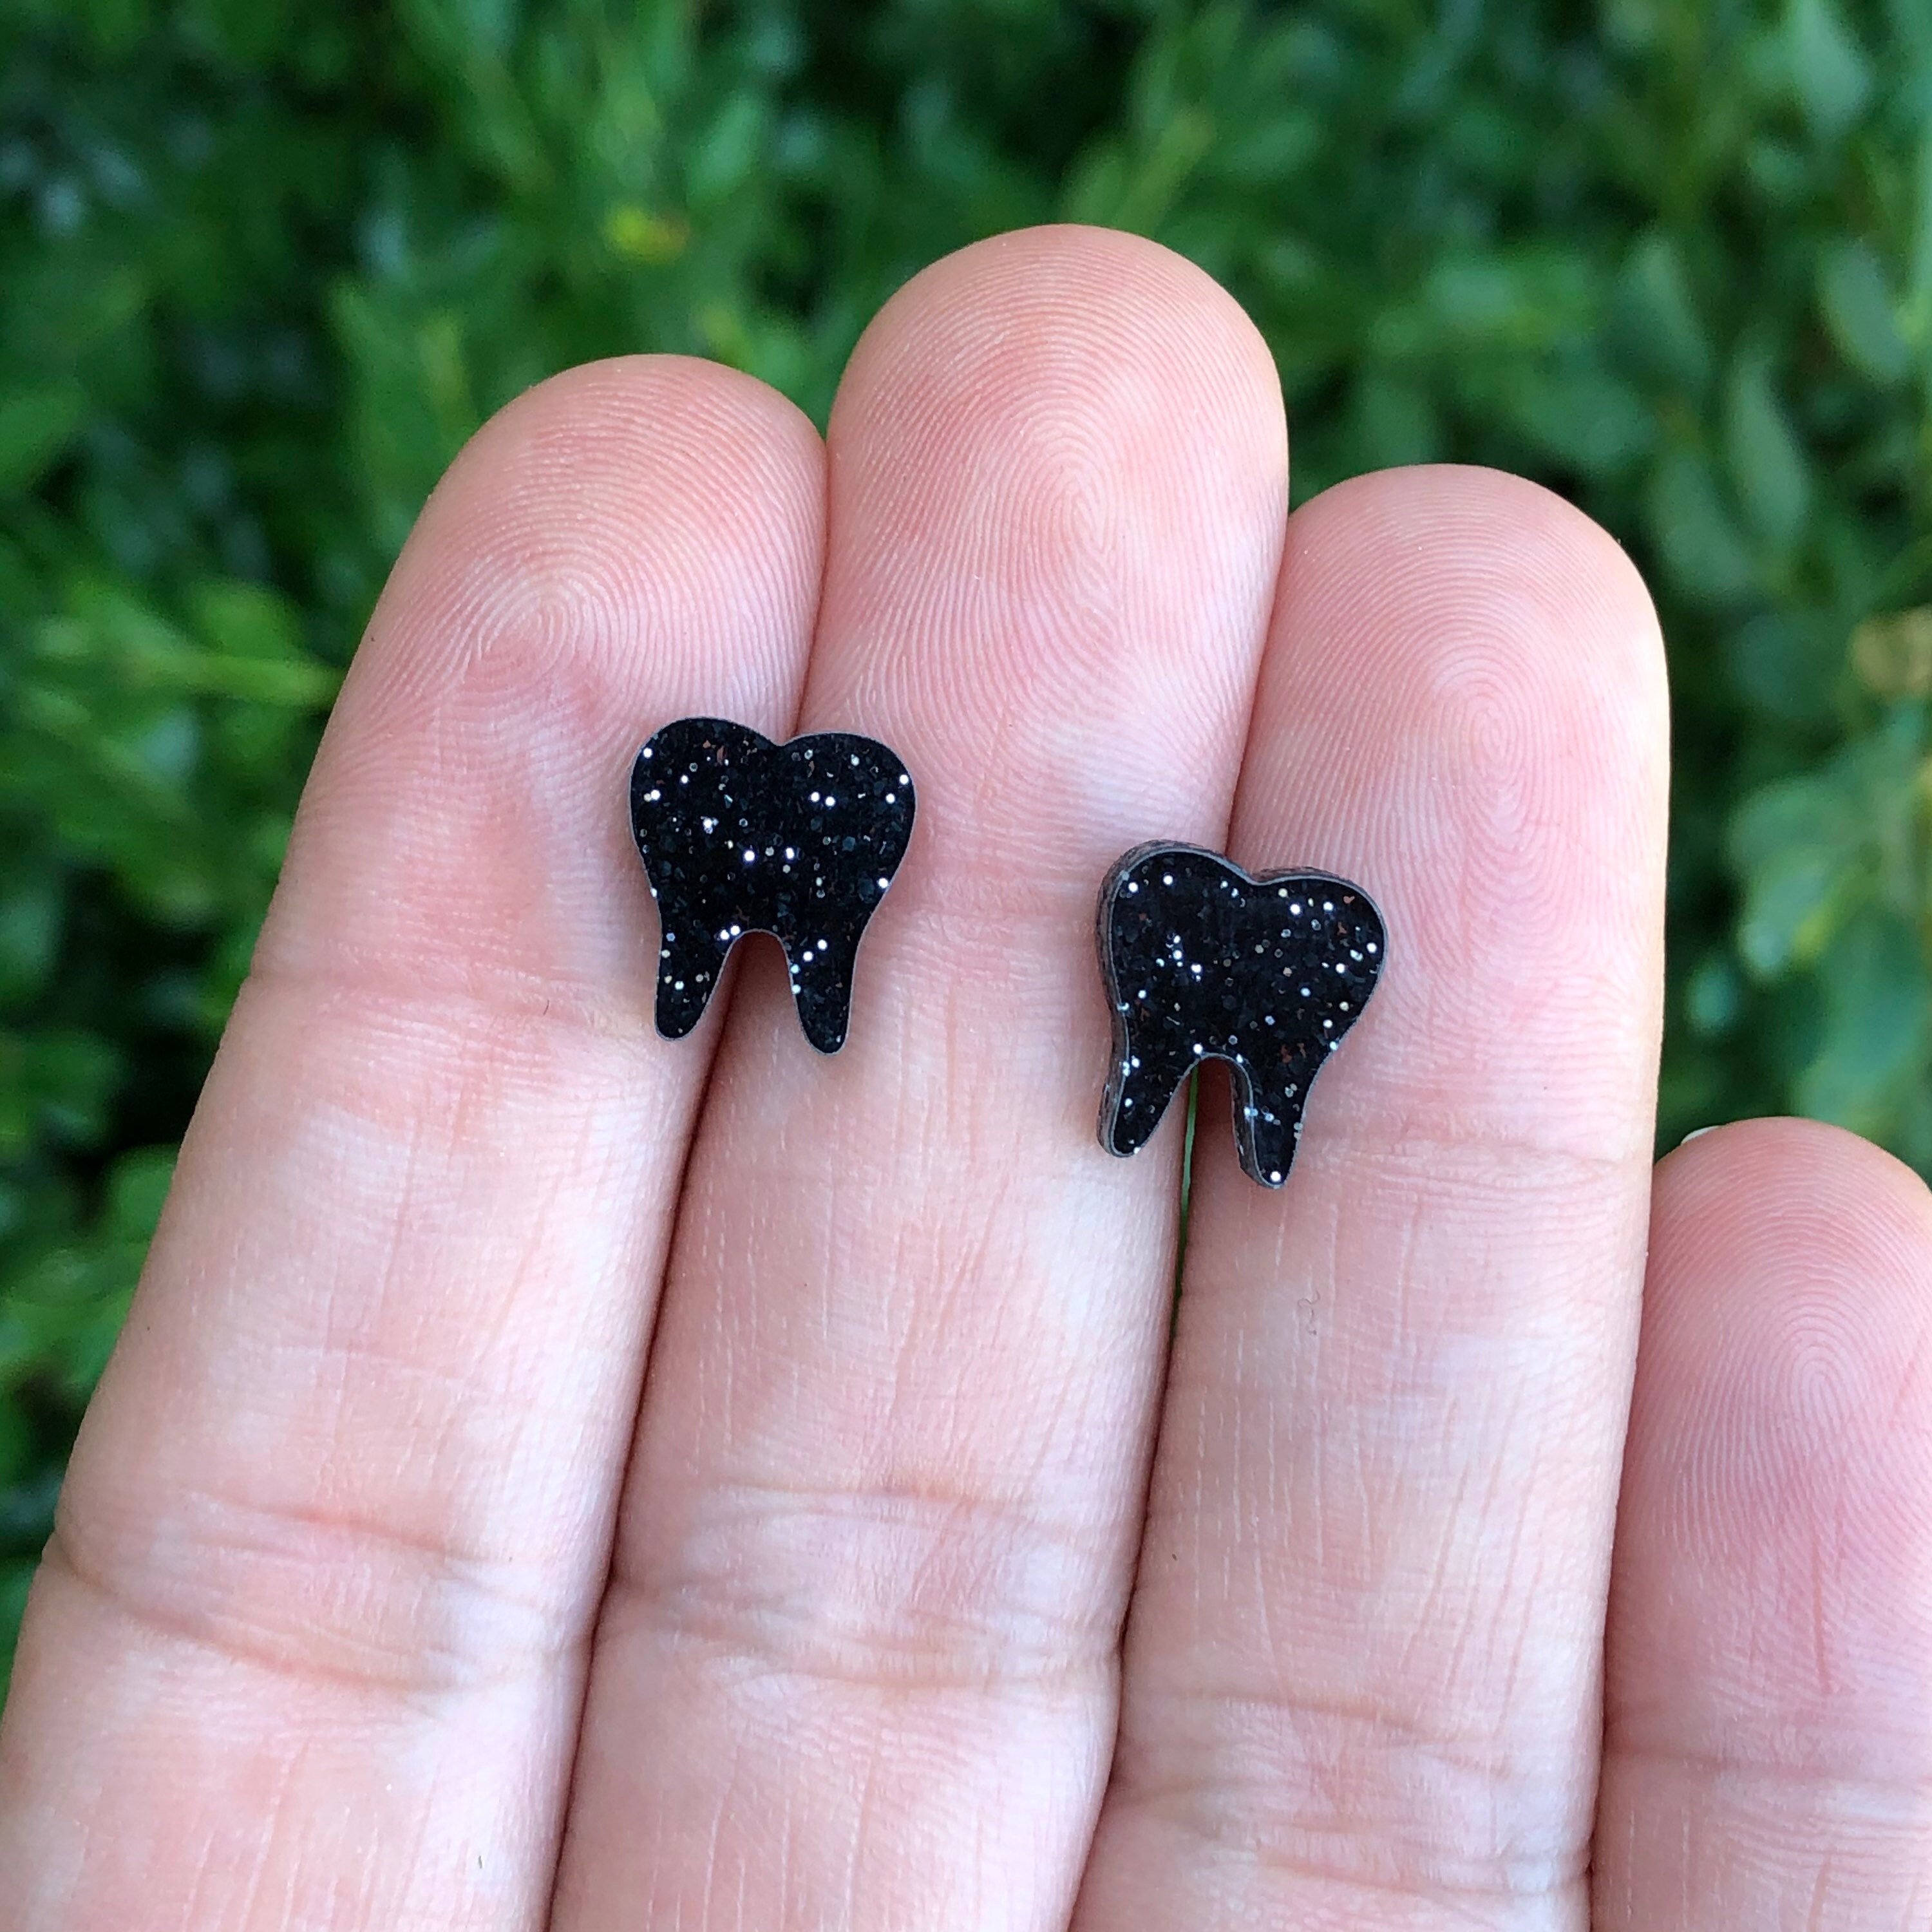 Black Glass Tooth Beads, Root Tooth Beads, Molar Beads, Dentist Gift Prank,  Teeth Beads for Jewelry, Lampwork Beads, Teeth Necklace 